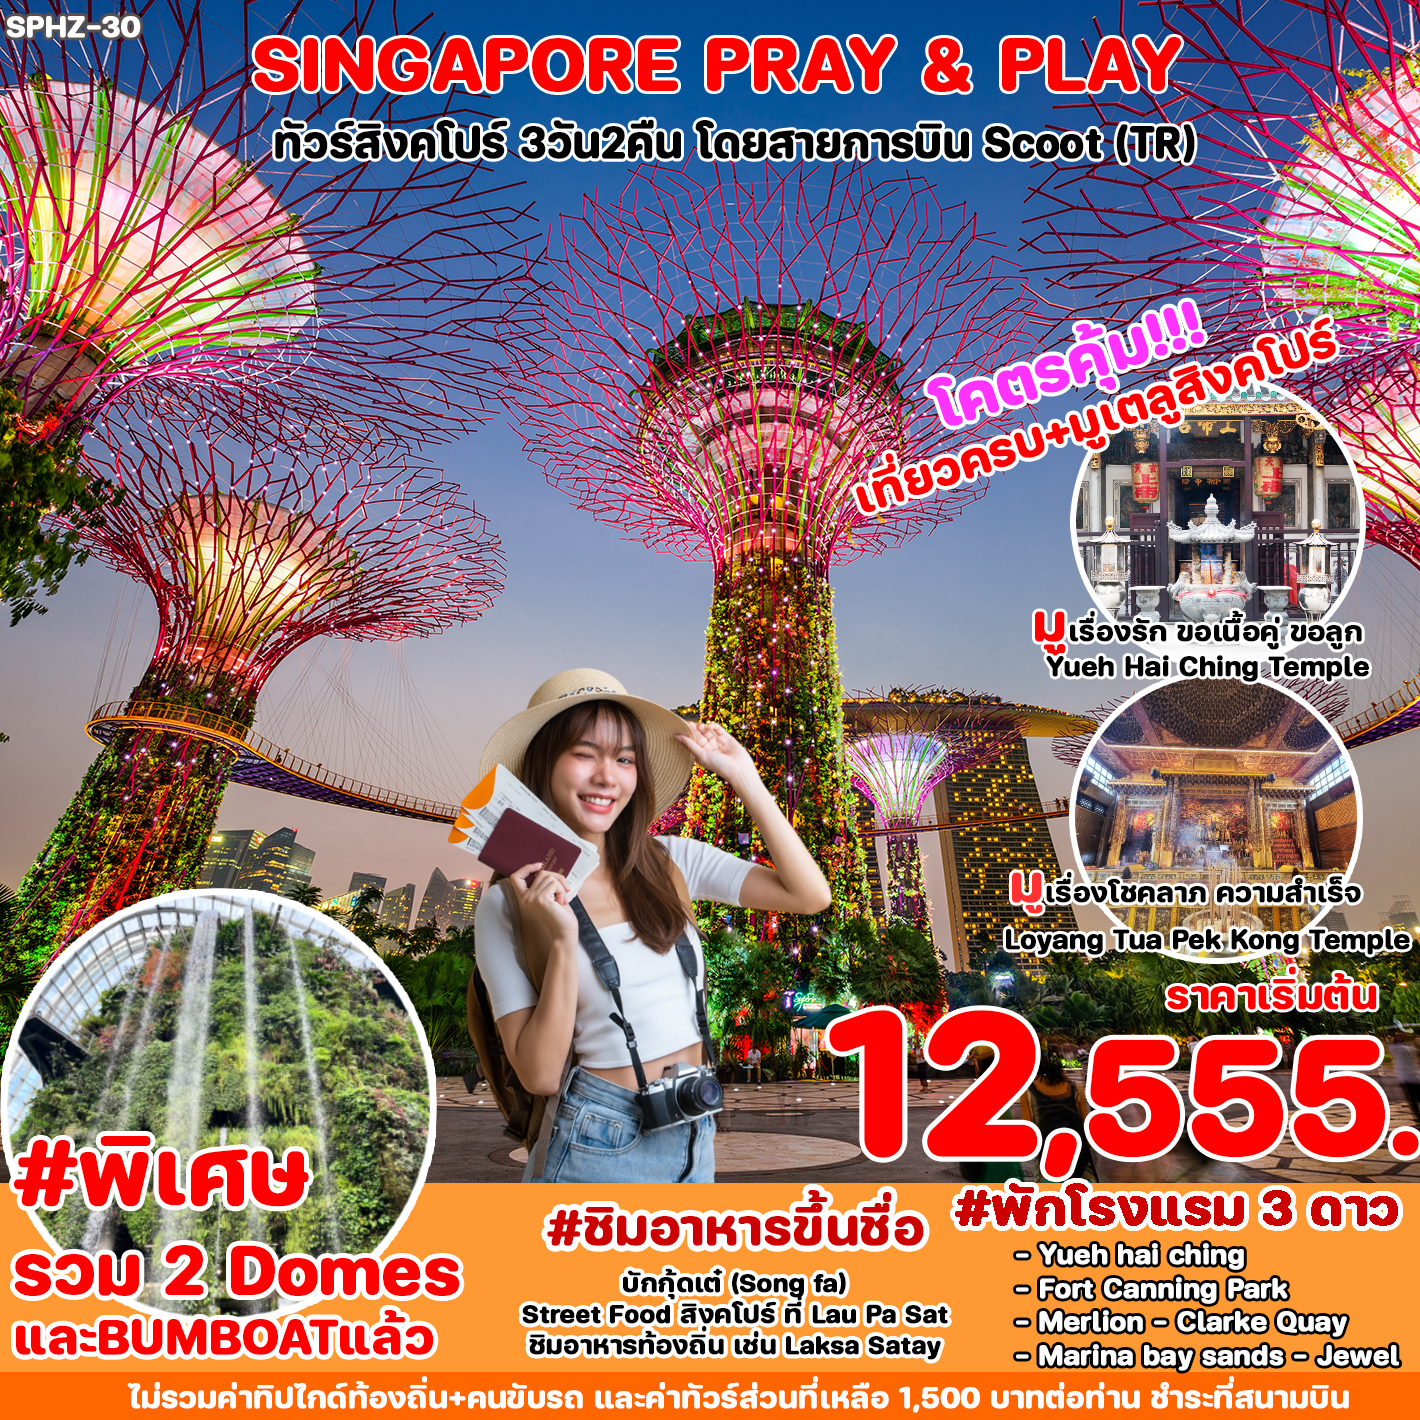 SINGAPORE PRAY and PLAY 3 วัน 2 คืน BY SCOOT